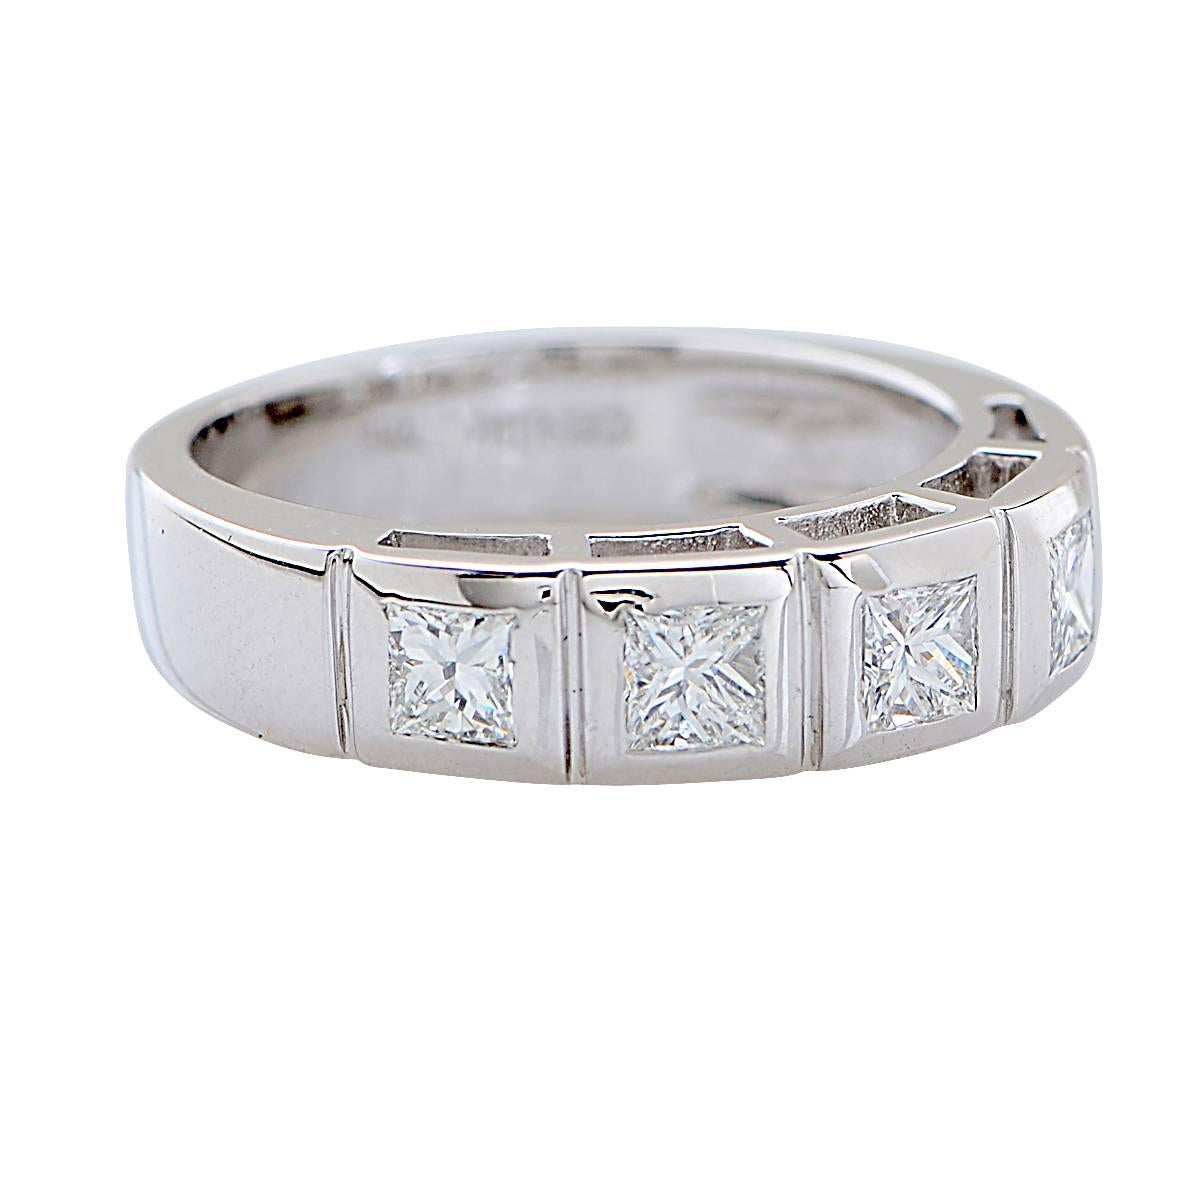 18 Karat White Gold Band Featuring 5 Princess Cut Diamonds Weighing Approximately 1.00 Carats Total, G Color, VS Clarity.

Metal weight: 4.99 grams

This Diamond Ring is Accompanied by a Retail Appraisal Performed by a Graduate Gemologist.